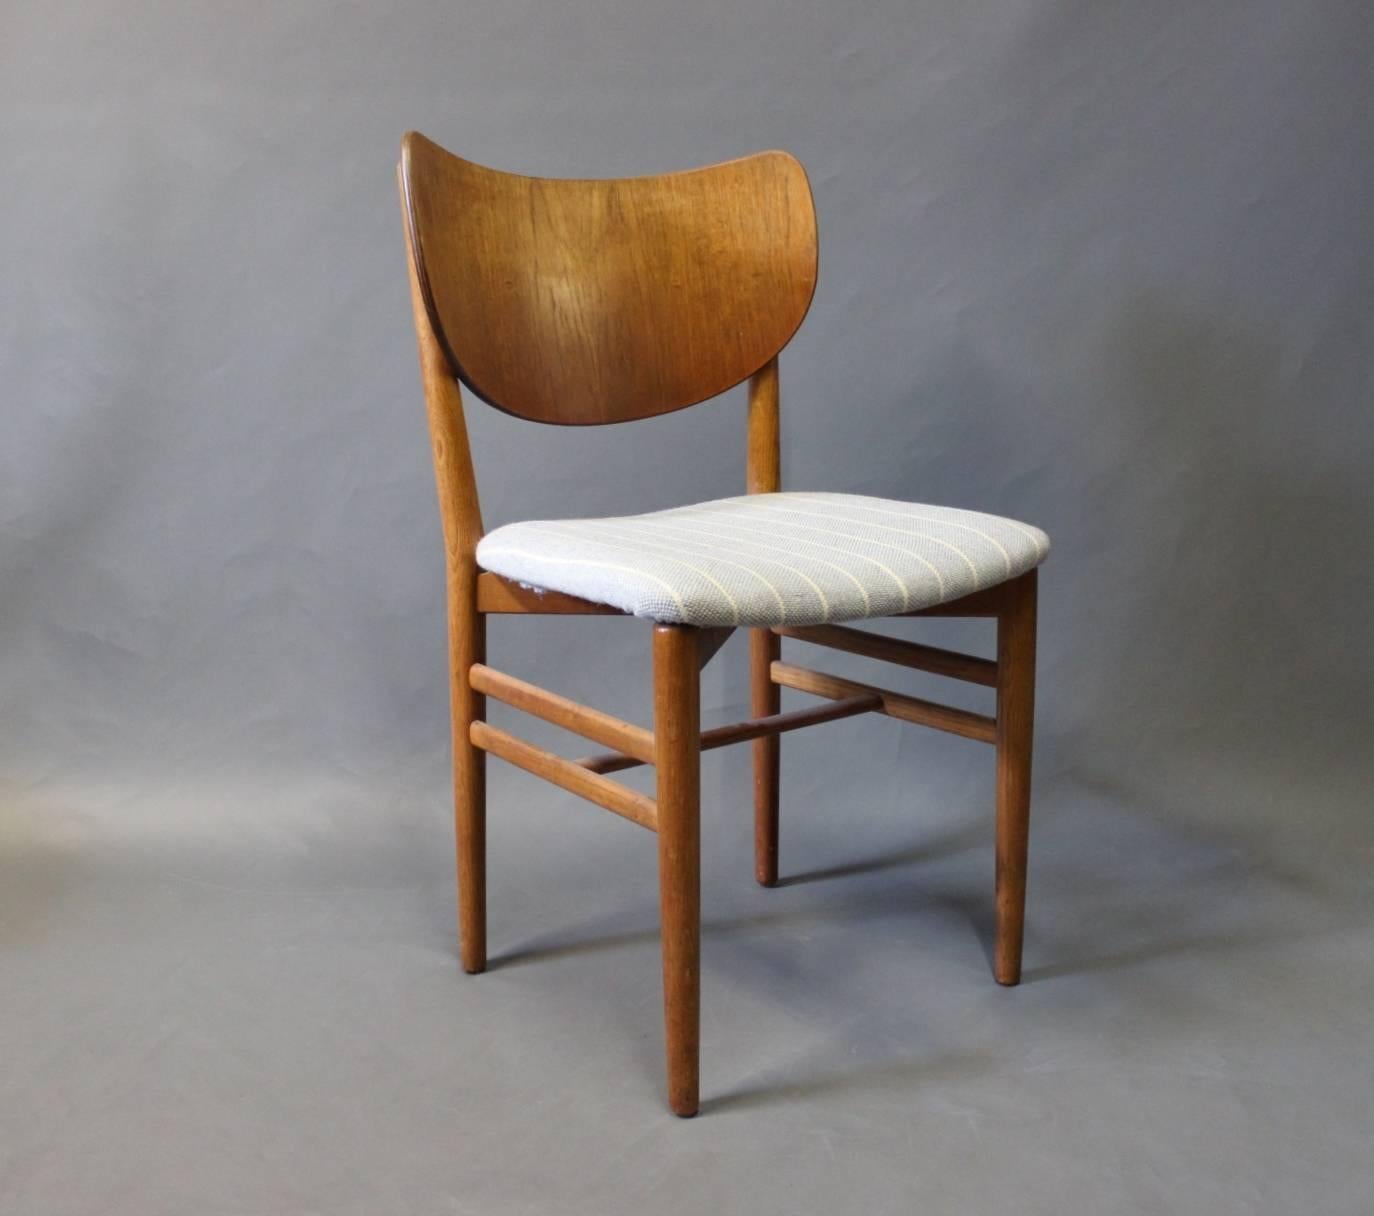 Scandinavian Modern Set of Four Dining Room Chairs Designed by Nils and Eva Koppel, 1960s